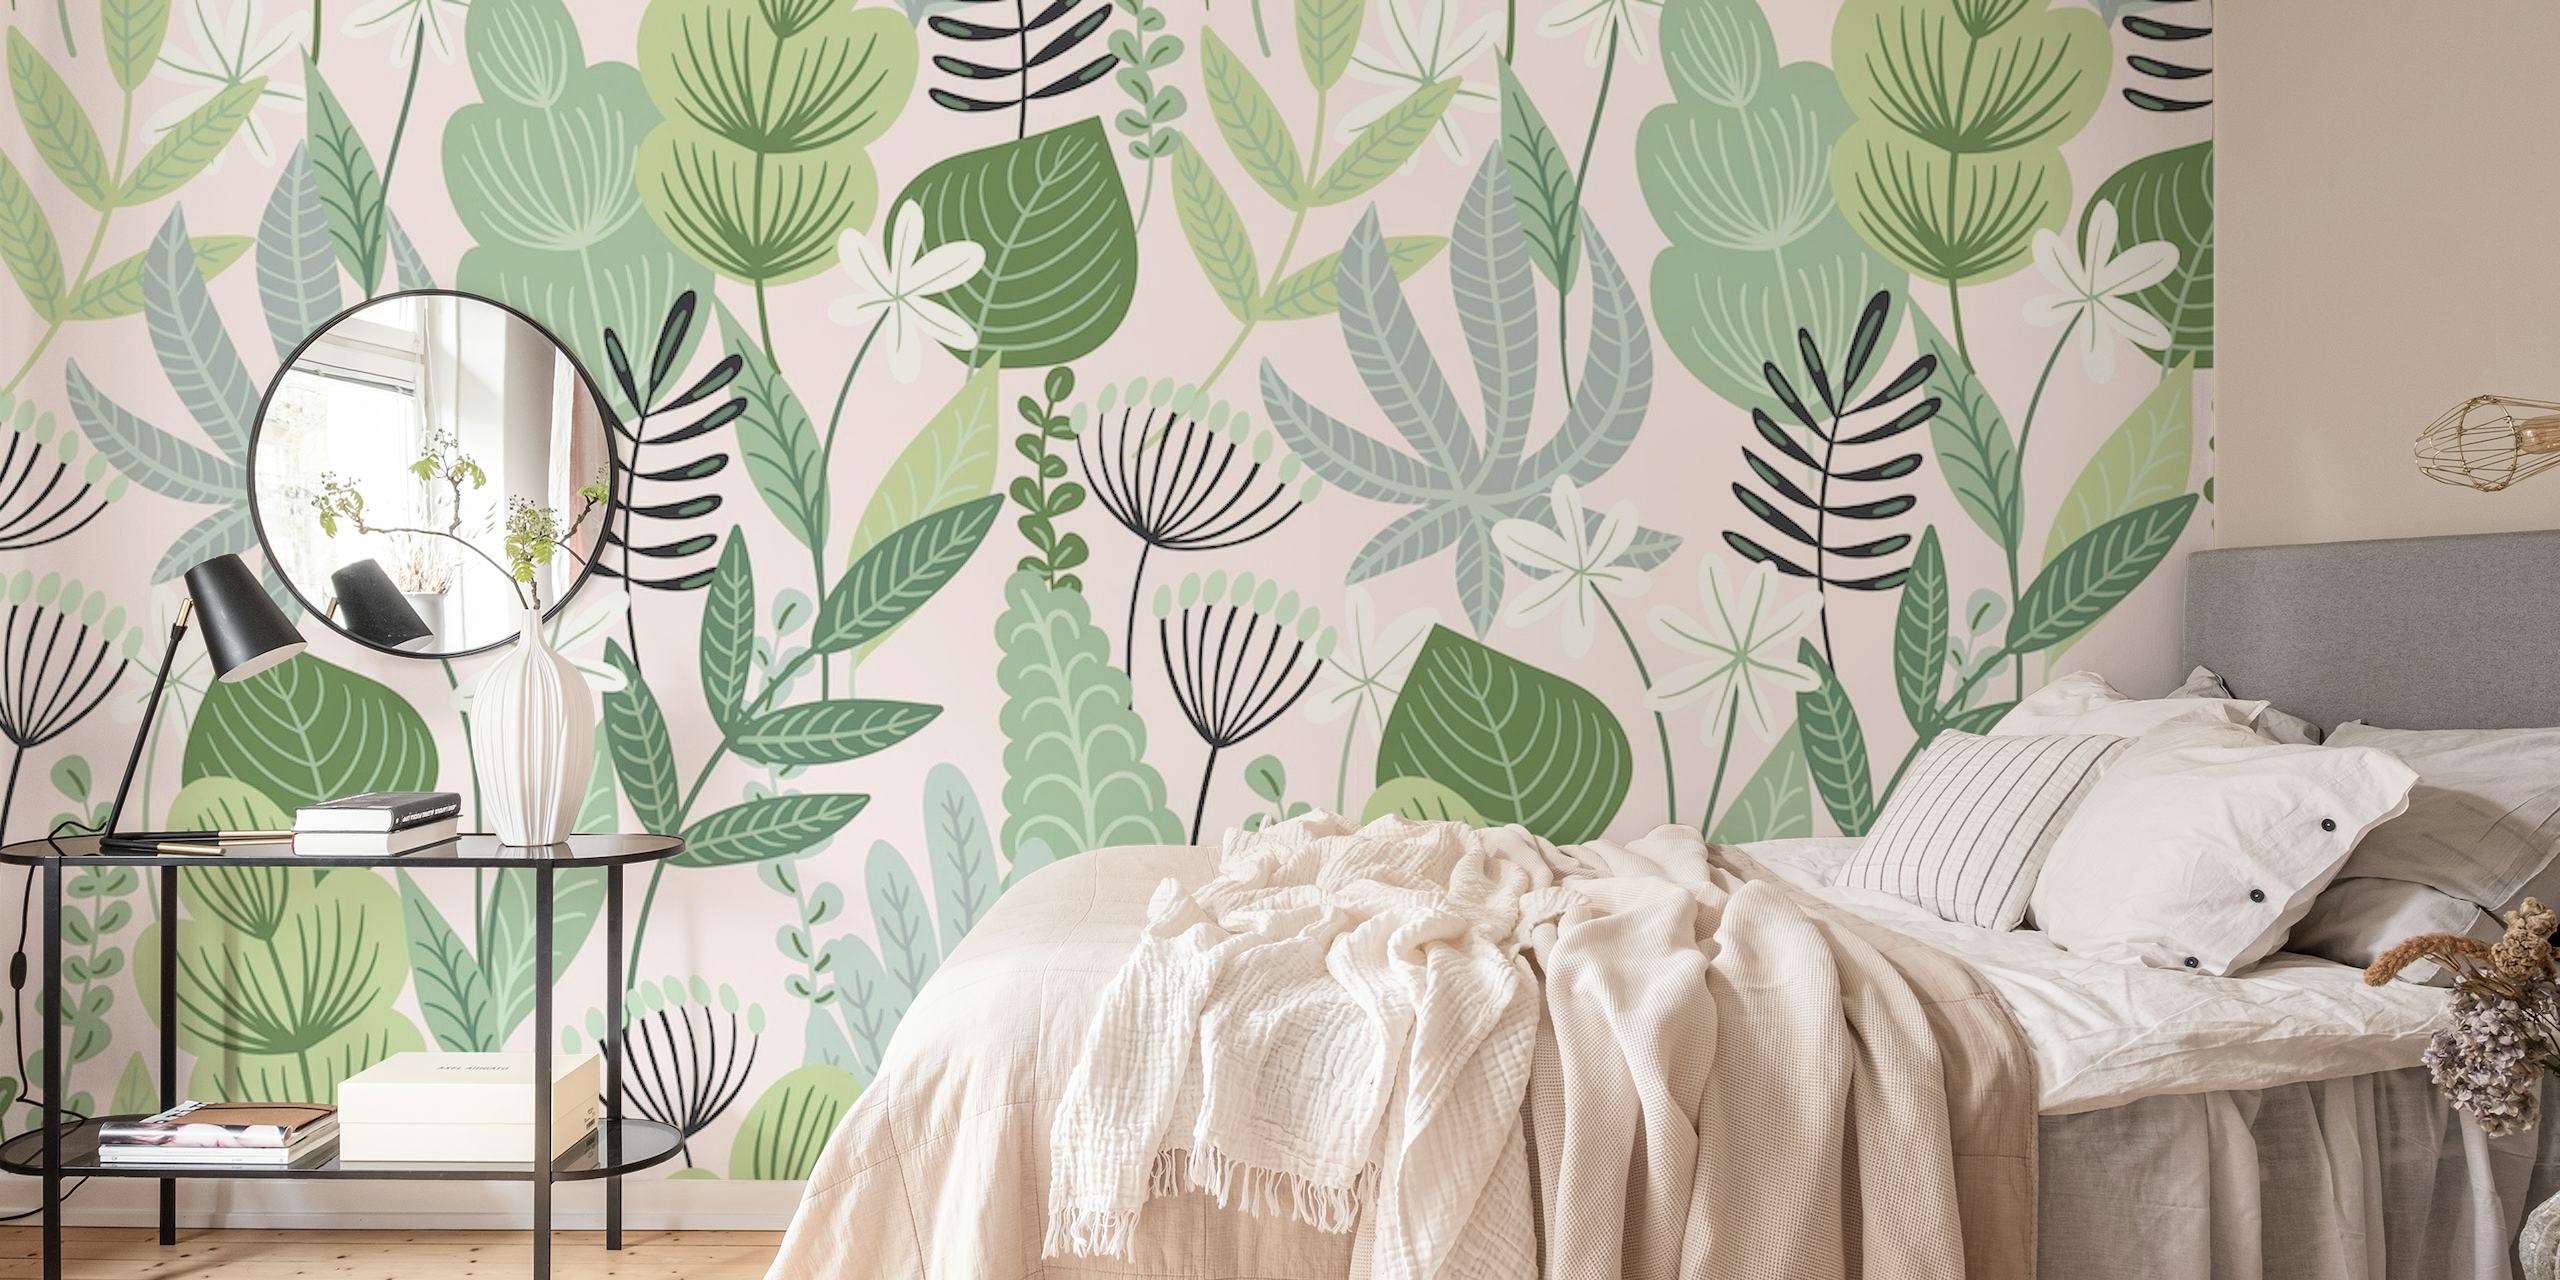 Jungle Blush wall mural with green foliage and blush pink accents